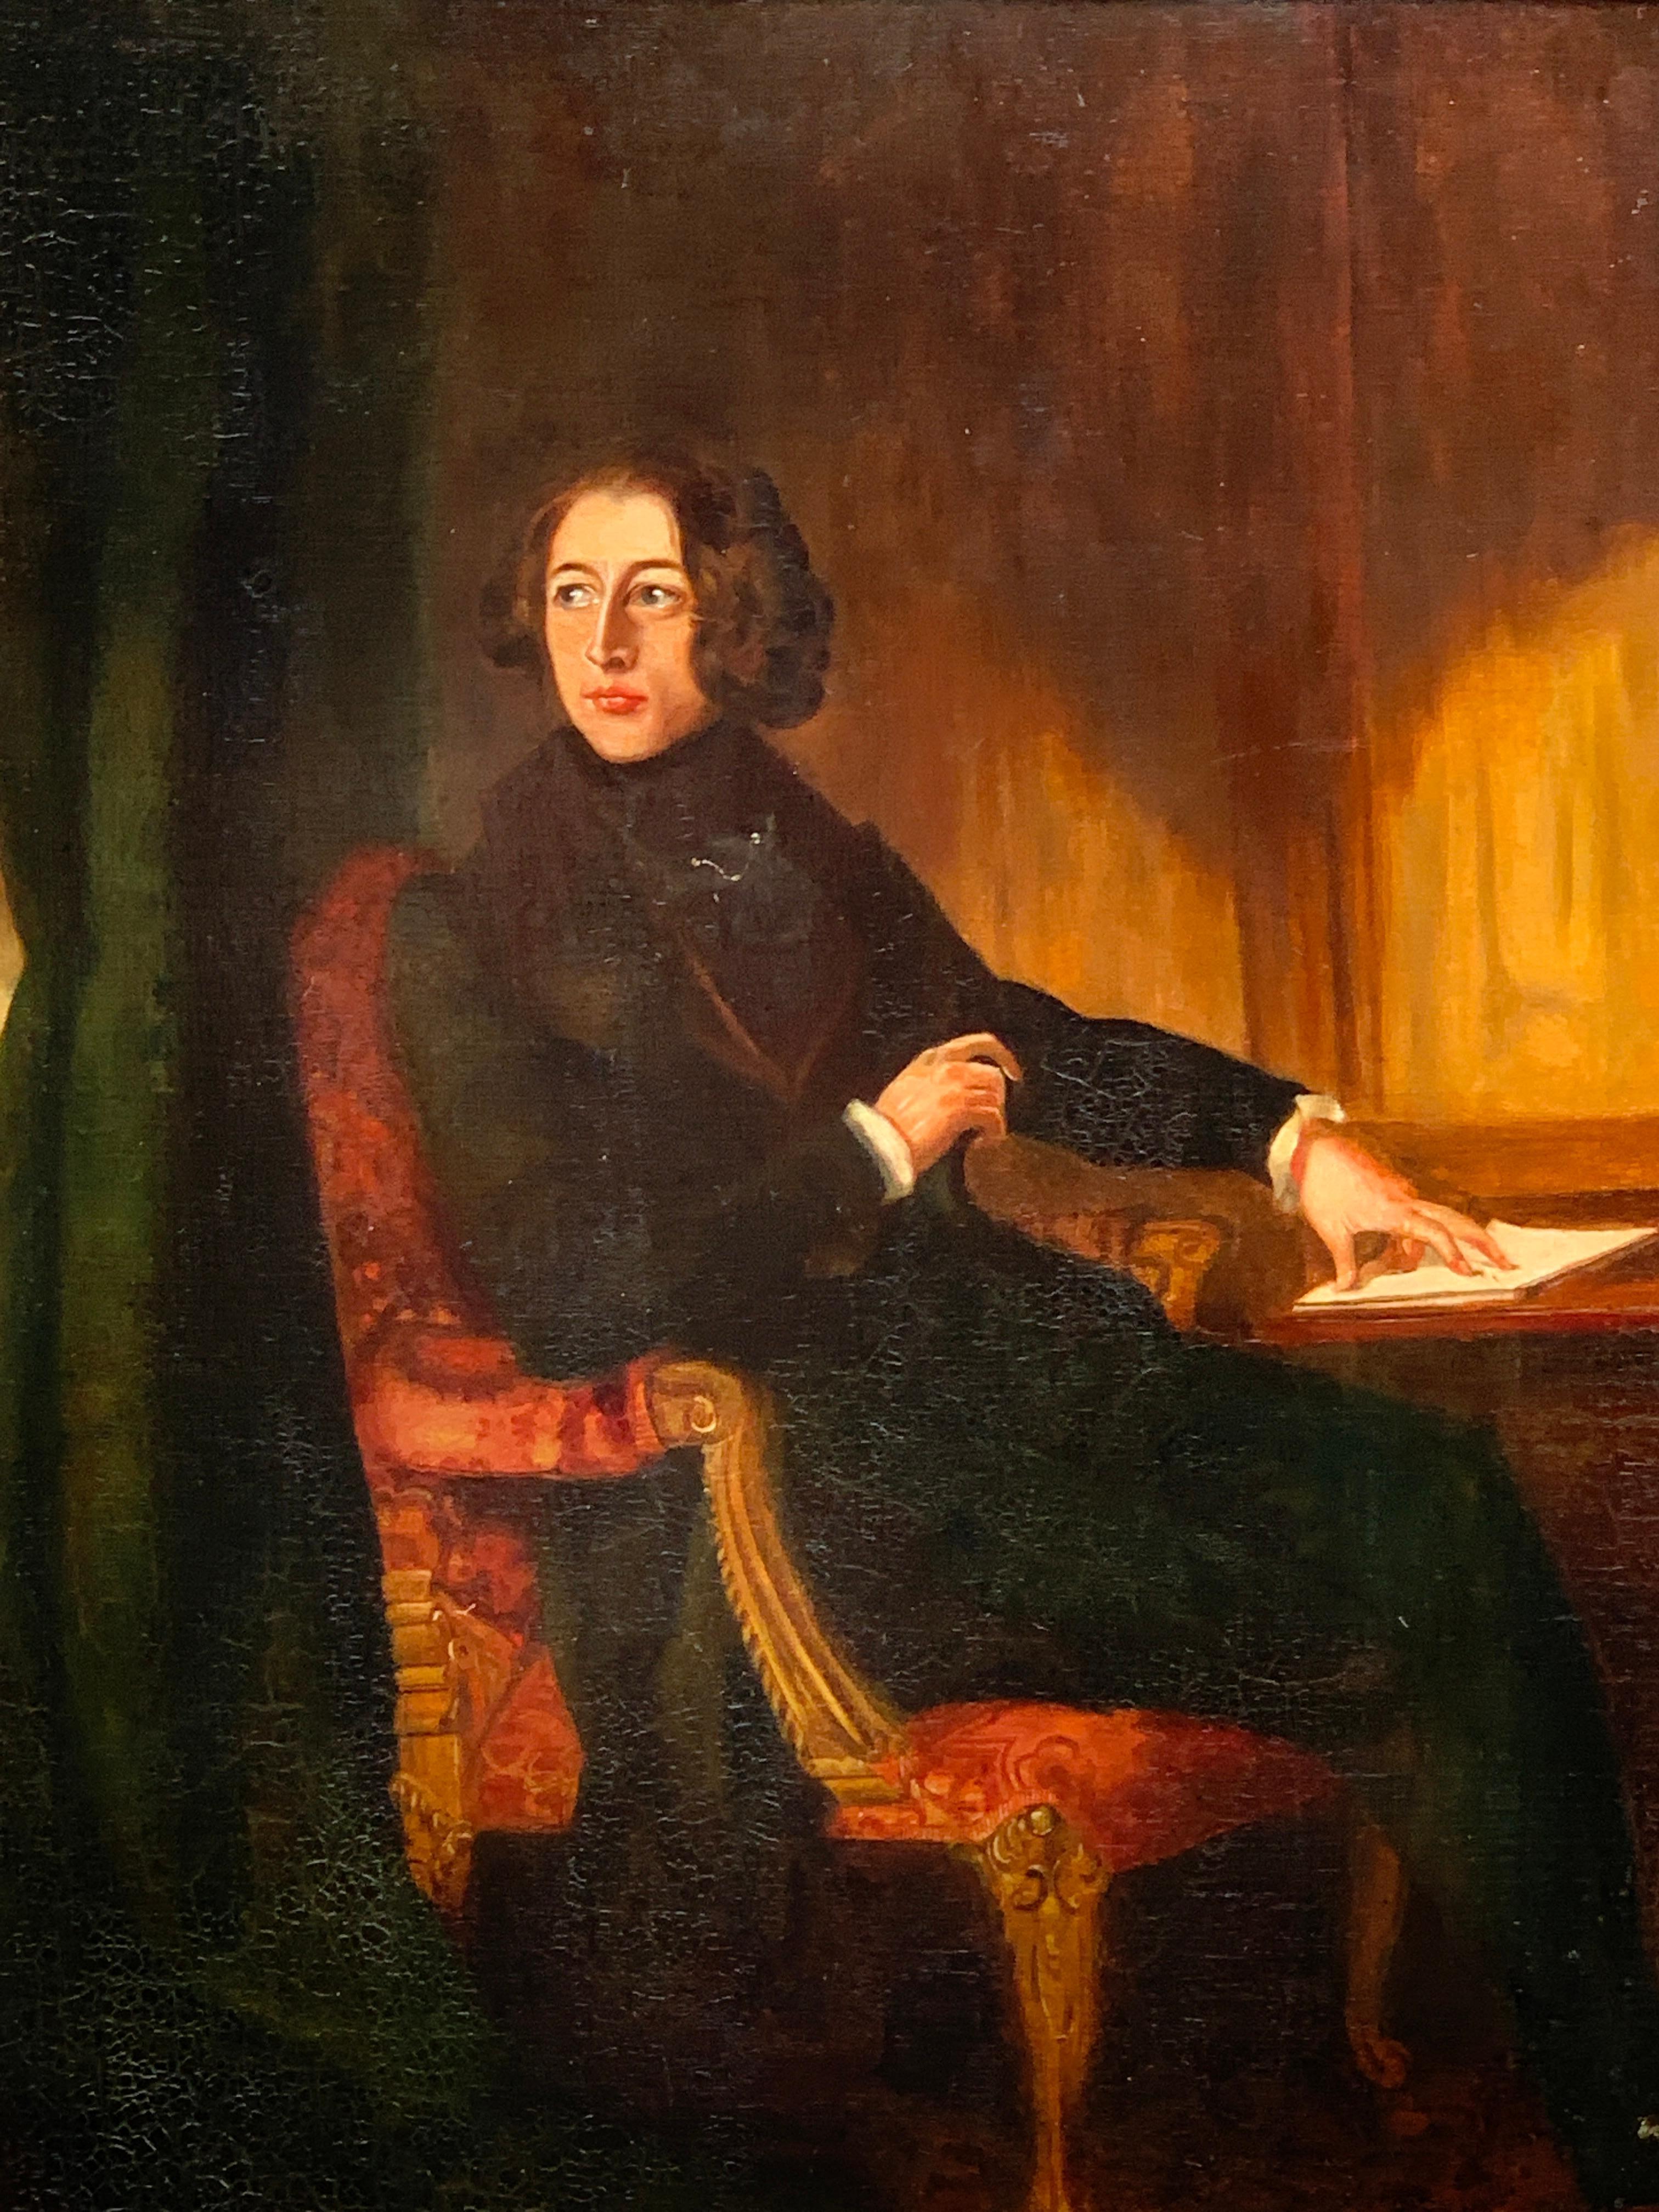 19th century British portrait of Sir Charles Dickens seated in an interior - Painting by Daniel Maclise